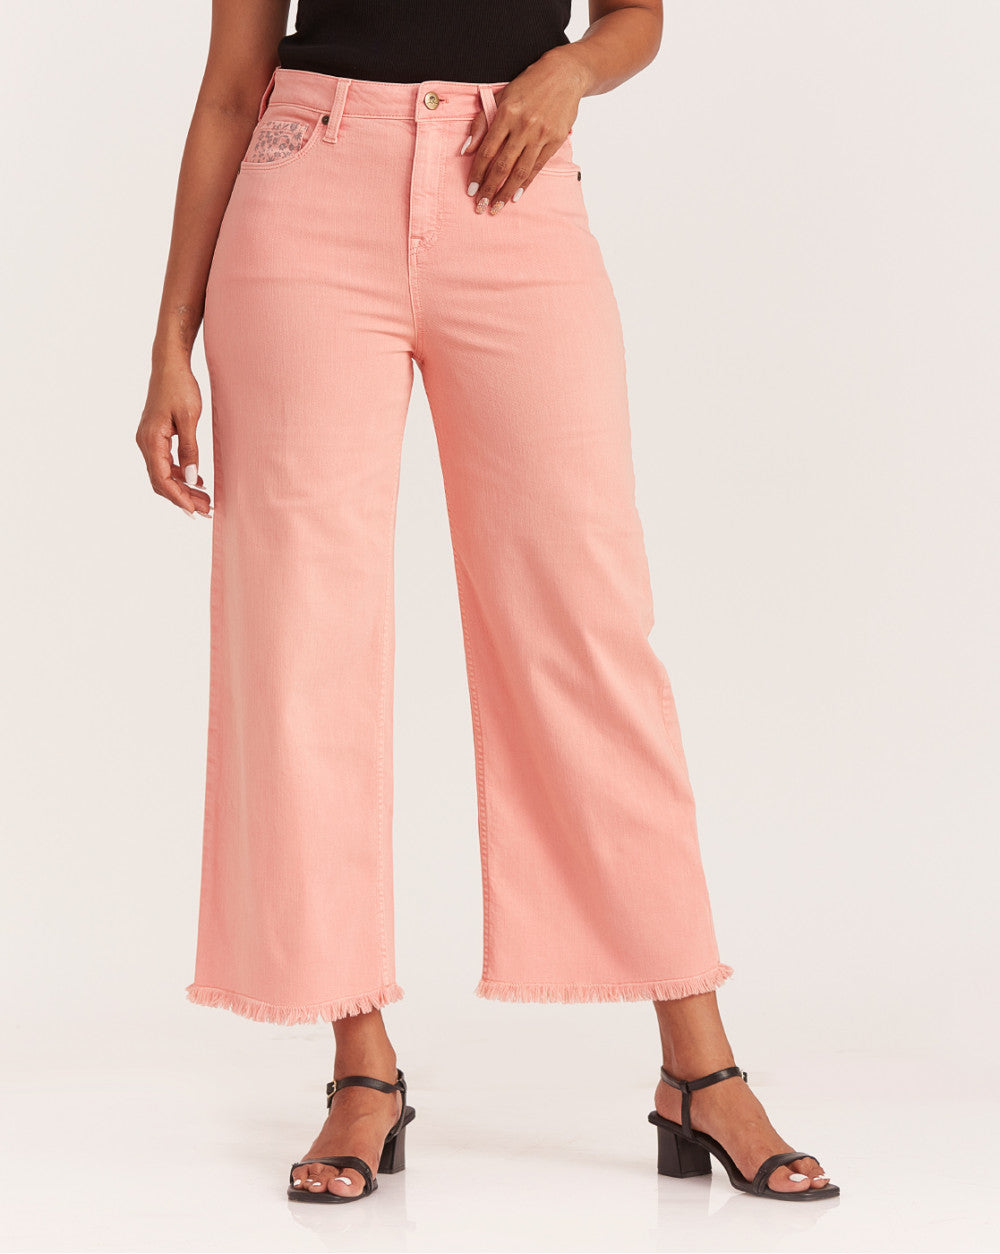 Wide Leg High Waist Colored Jeans - Coral